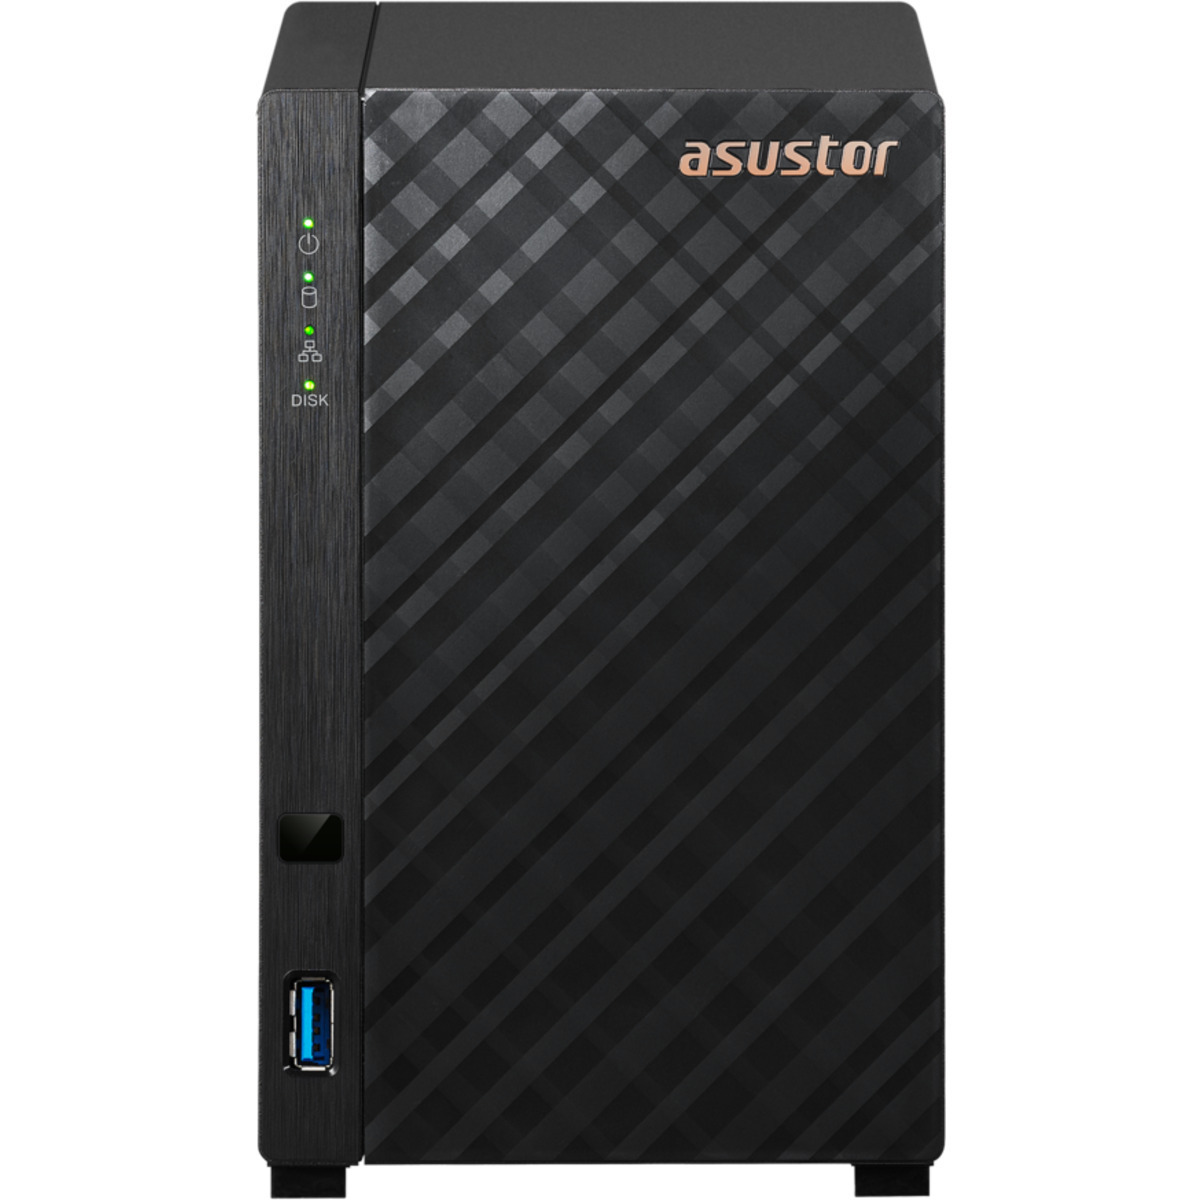 ASUSTOR DRIVESTOR 2 Lite AS1102TL 28tb 2-Bay Desktop Personal / Basic Home / Small Office NAS - Network Attached Storage Device 2x14tb Seagate EXOS X18 ST14000NM000J 3.5 7200rpm SATA 6Gb/s HDD ENTERPRISE Class Drives Installed - Burn-In Tested DRIVESTOR 2 Lite AS1102TL